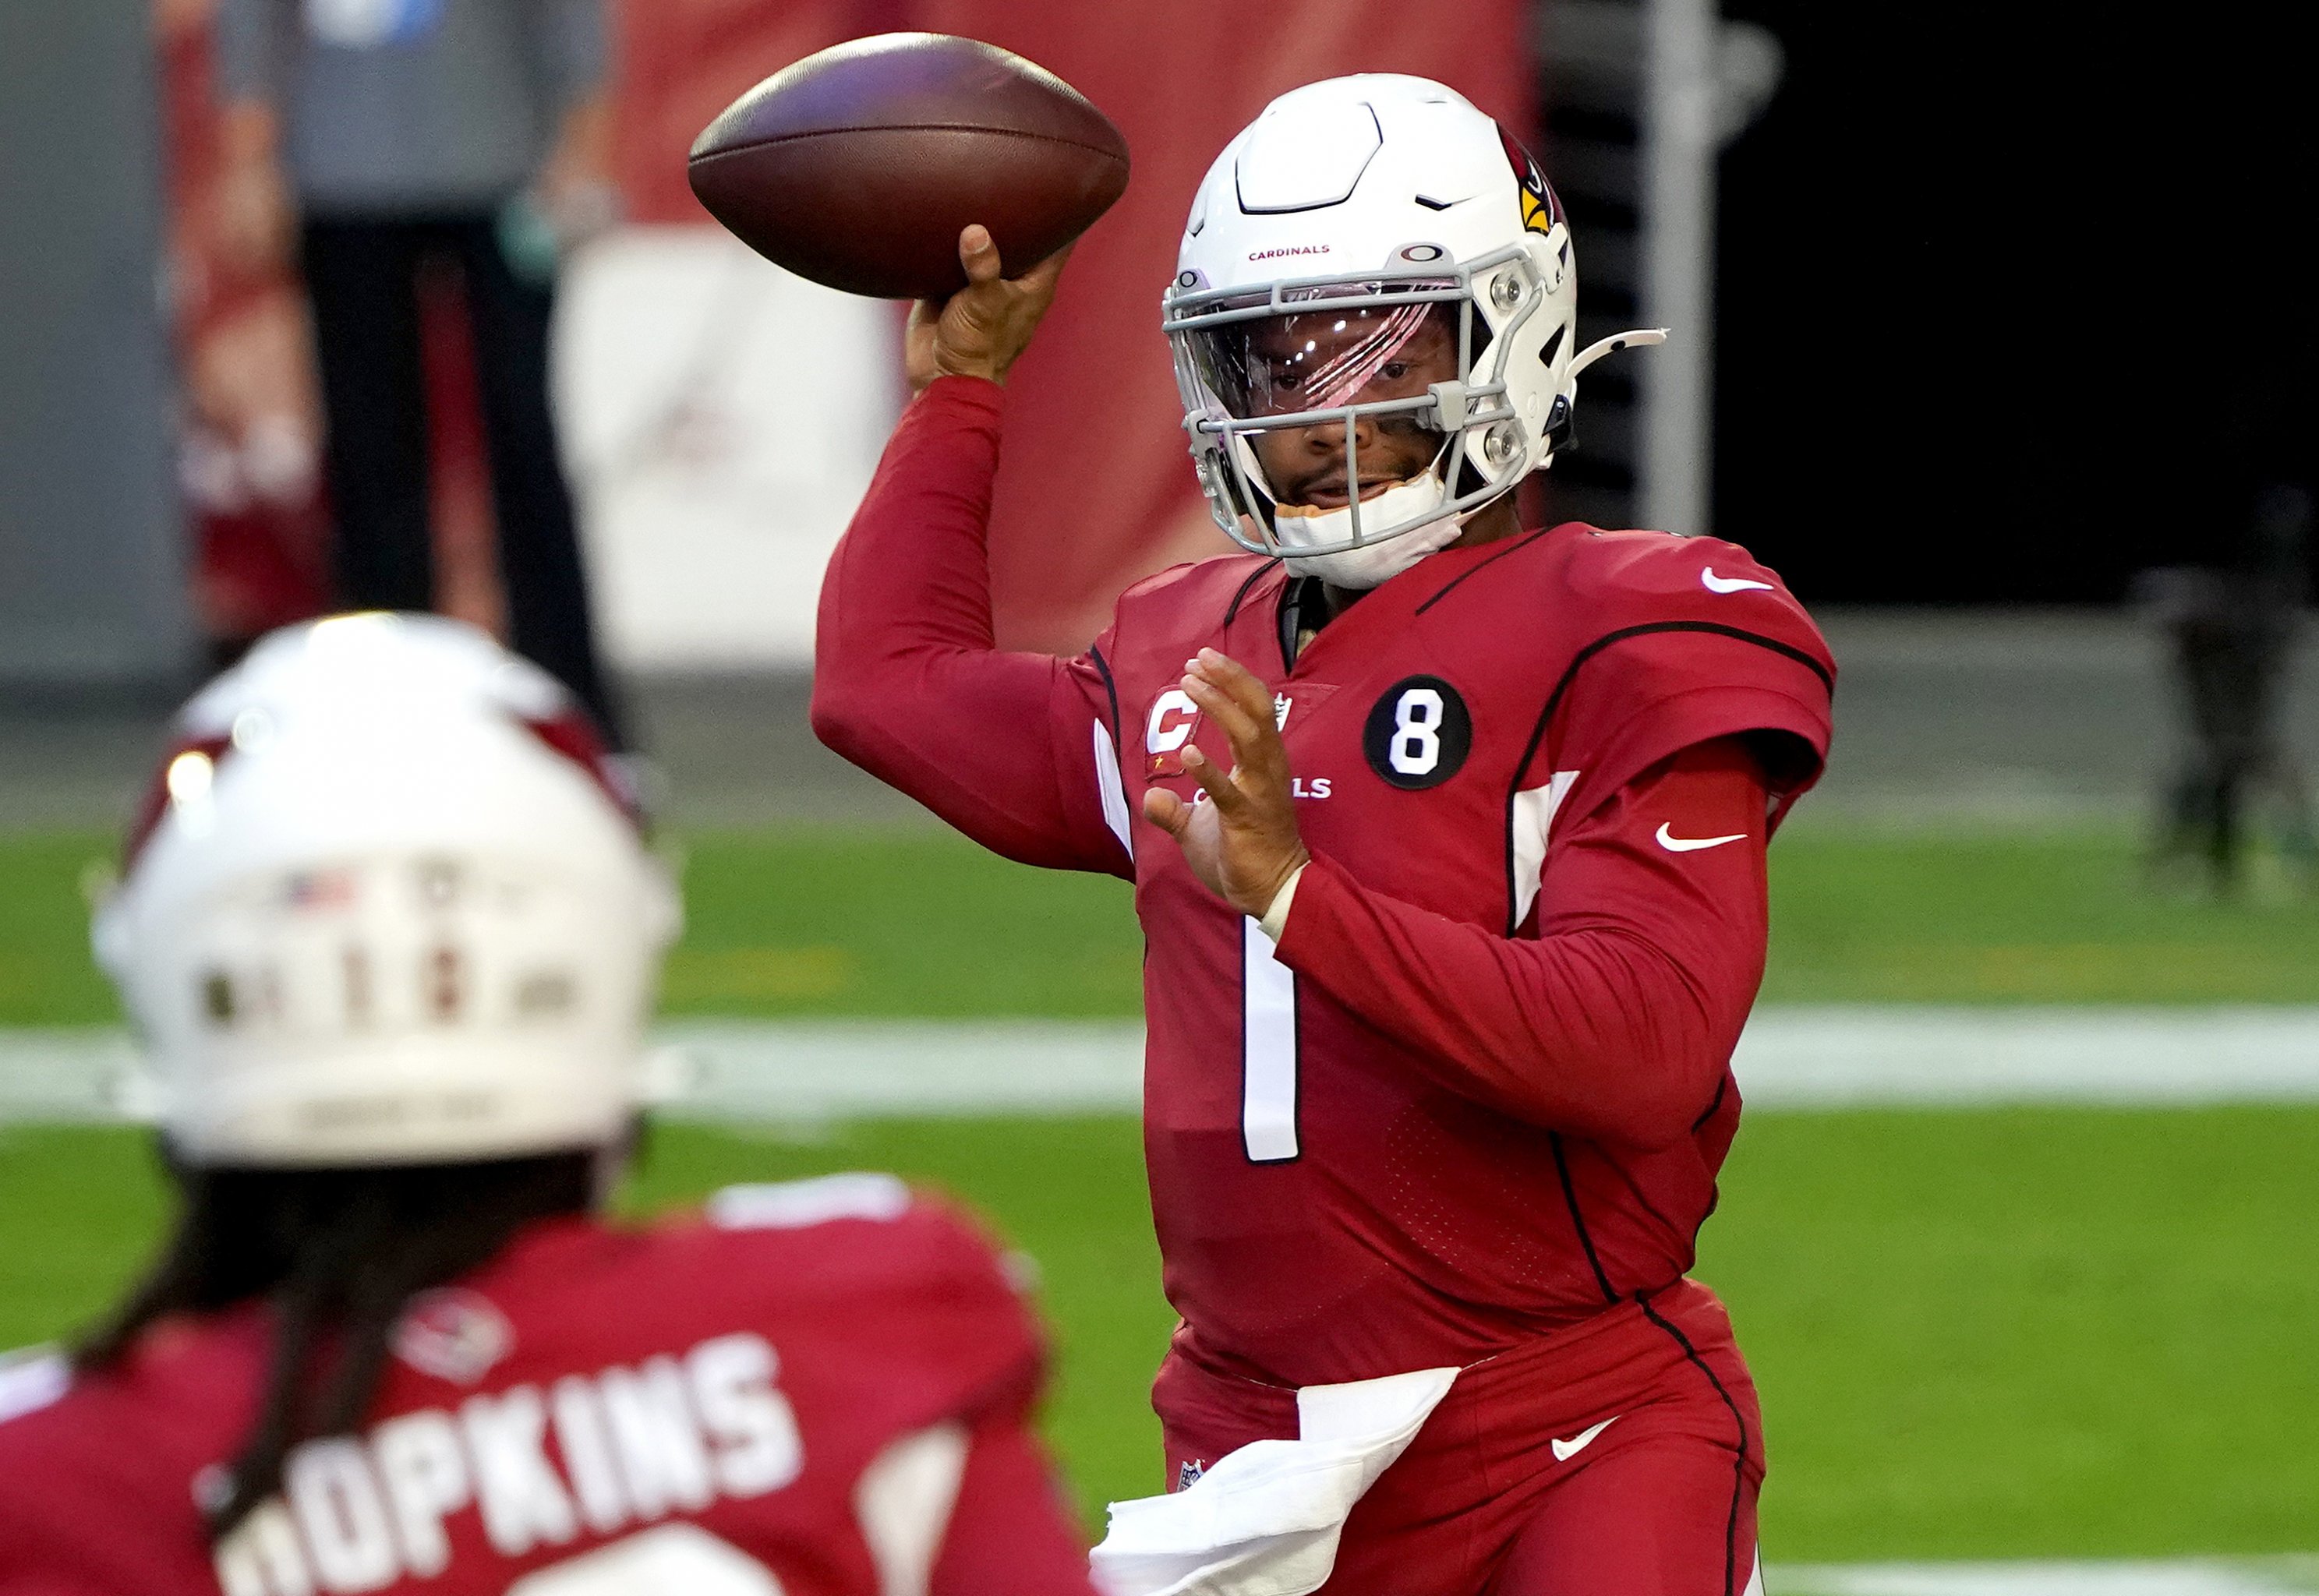 Arizona Cardinals are opportunistic and efficient in big 'Thursday